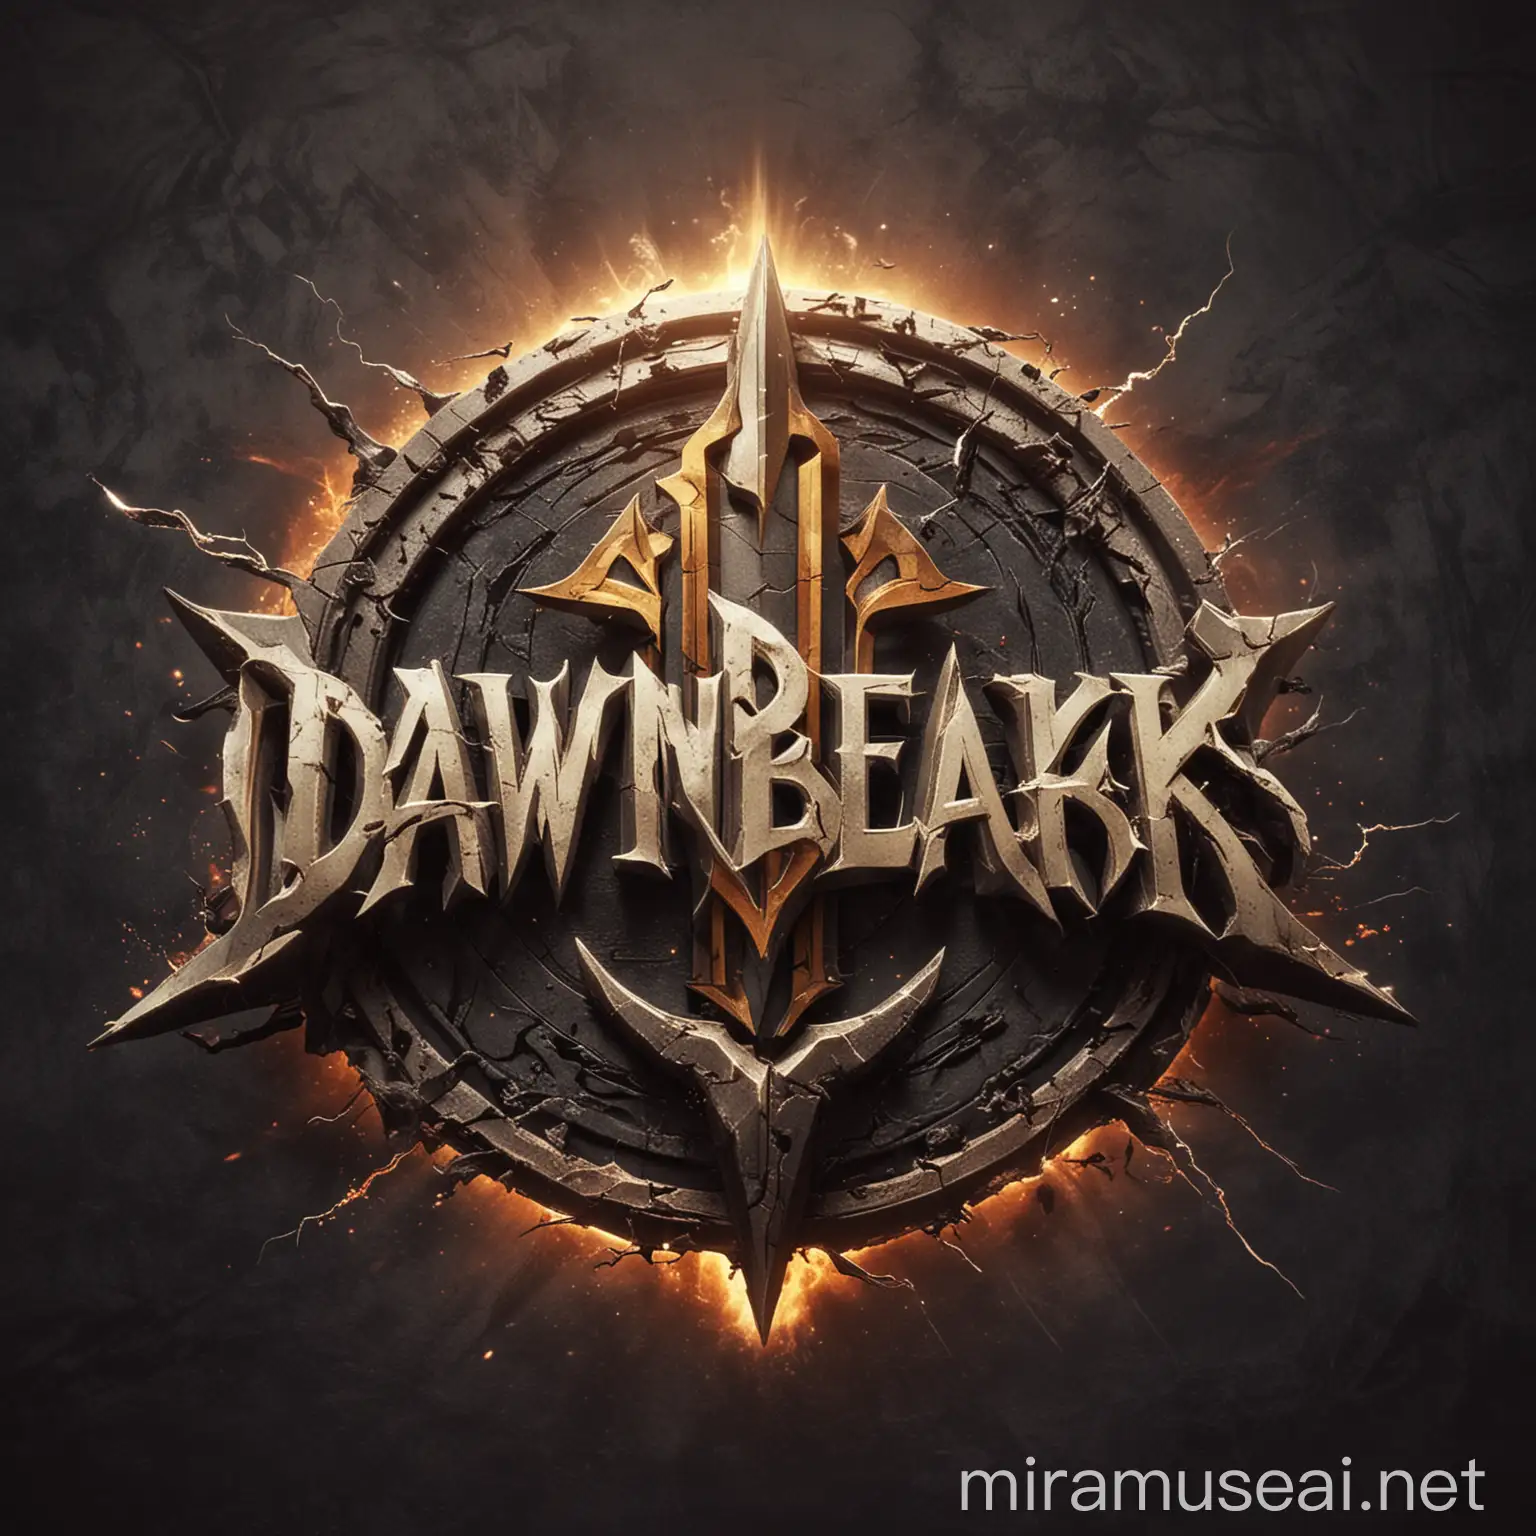 Dawnbreakers Logo Symbolizing Optimism and Hope for a Brighter Future